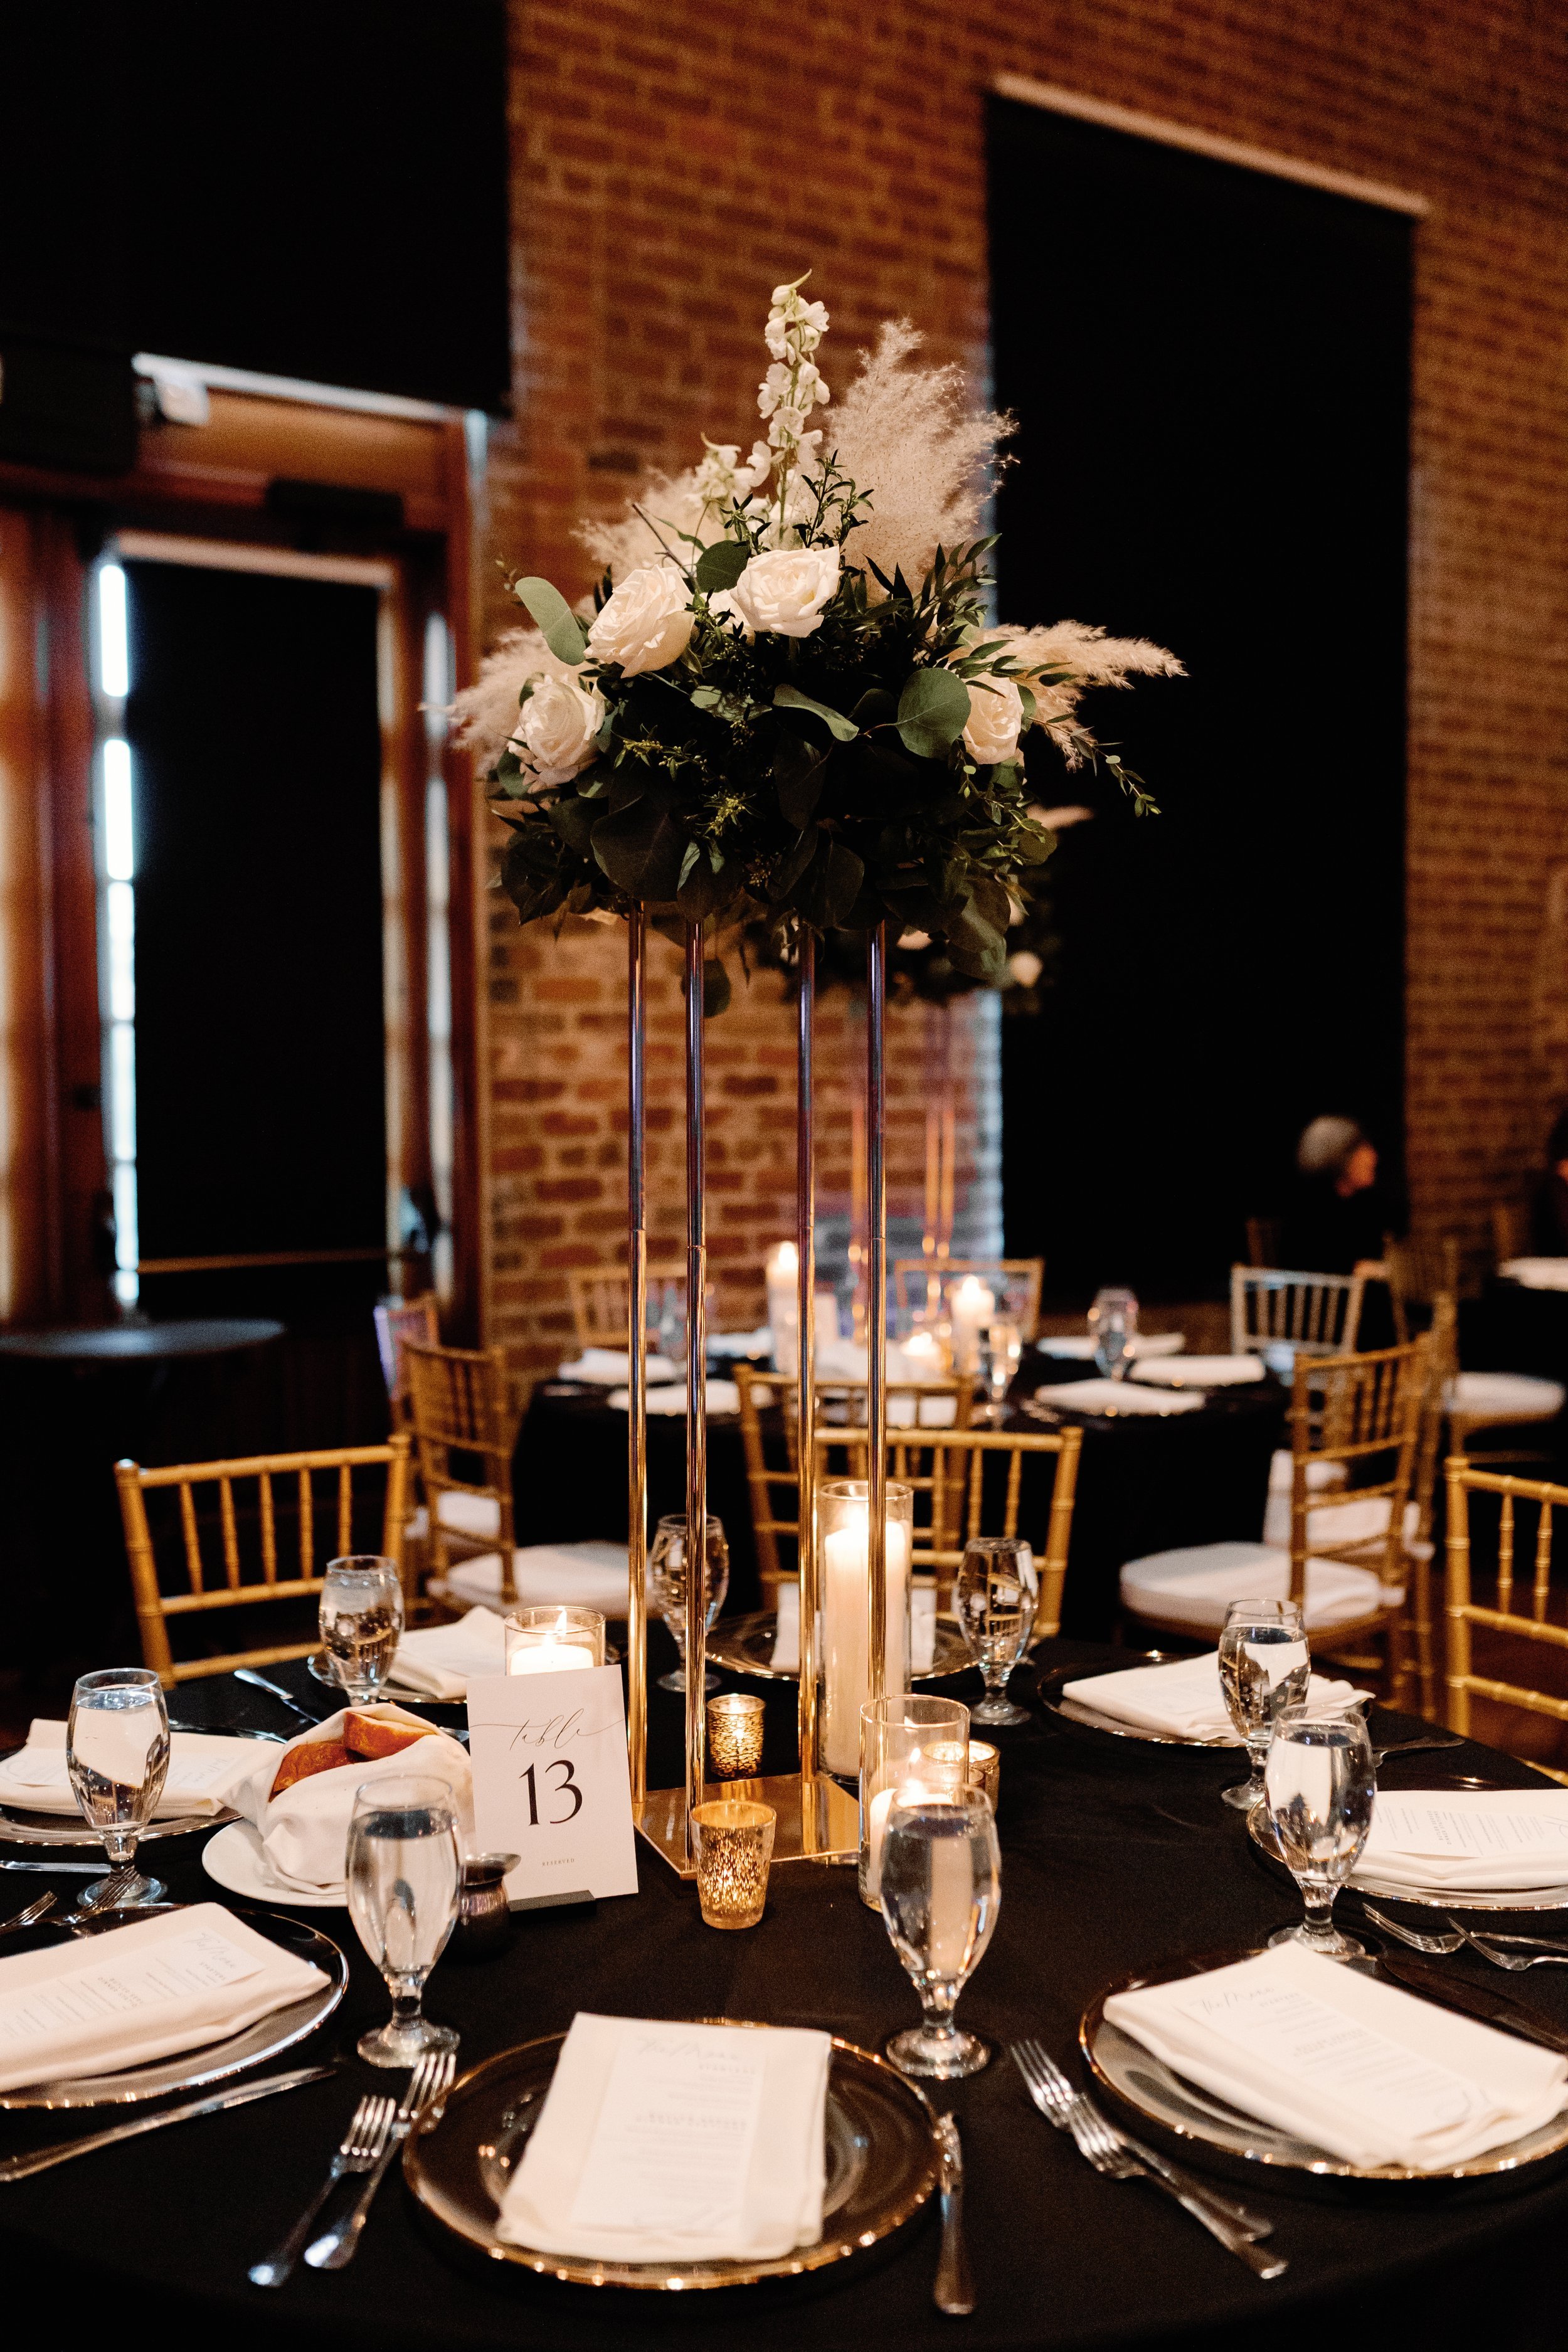 bailee-and-macs-romantic-candlelit-wedding-ceremony-at-the-charles-h-morris-center-planned-by-savannah-wedding-planner-and-florist-ivory-and-beau-13.jpg